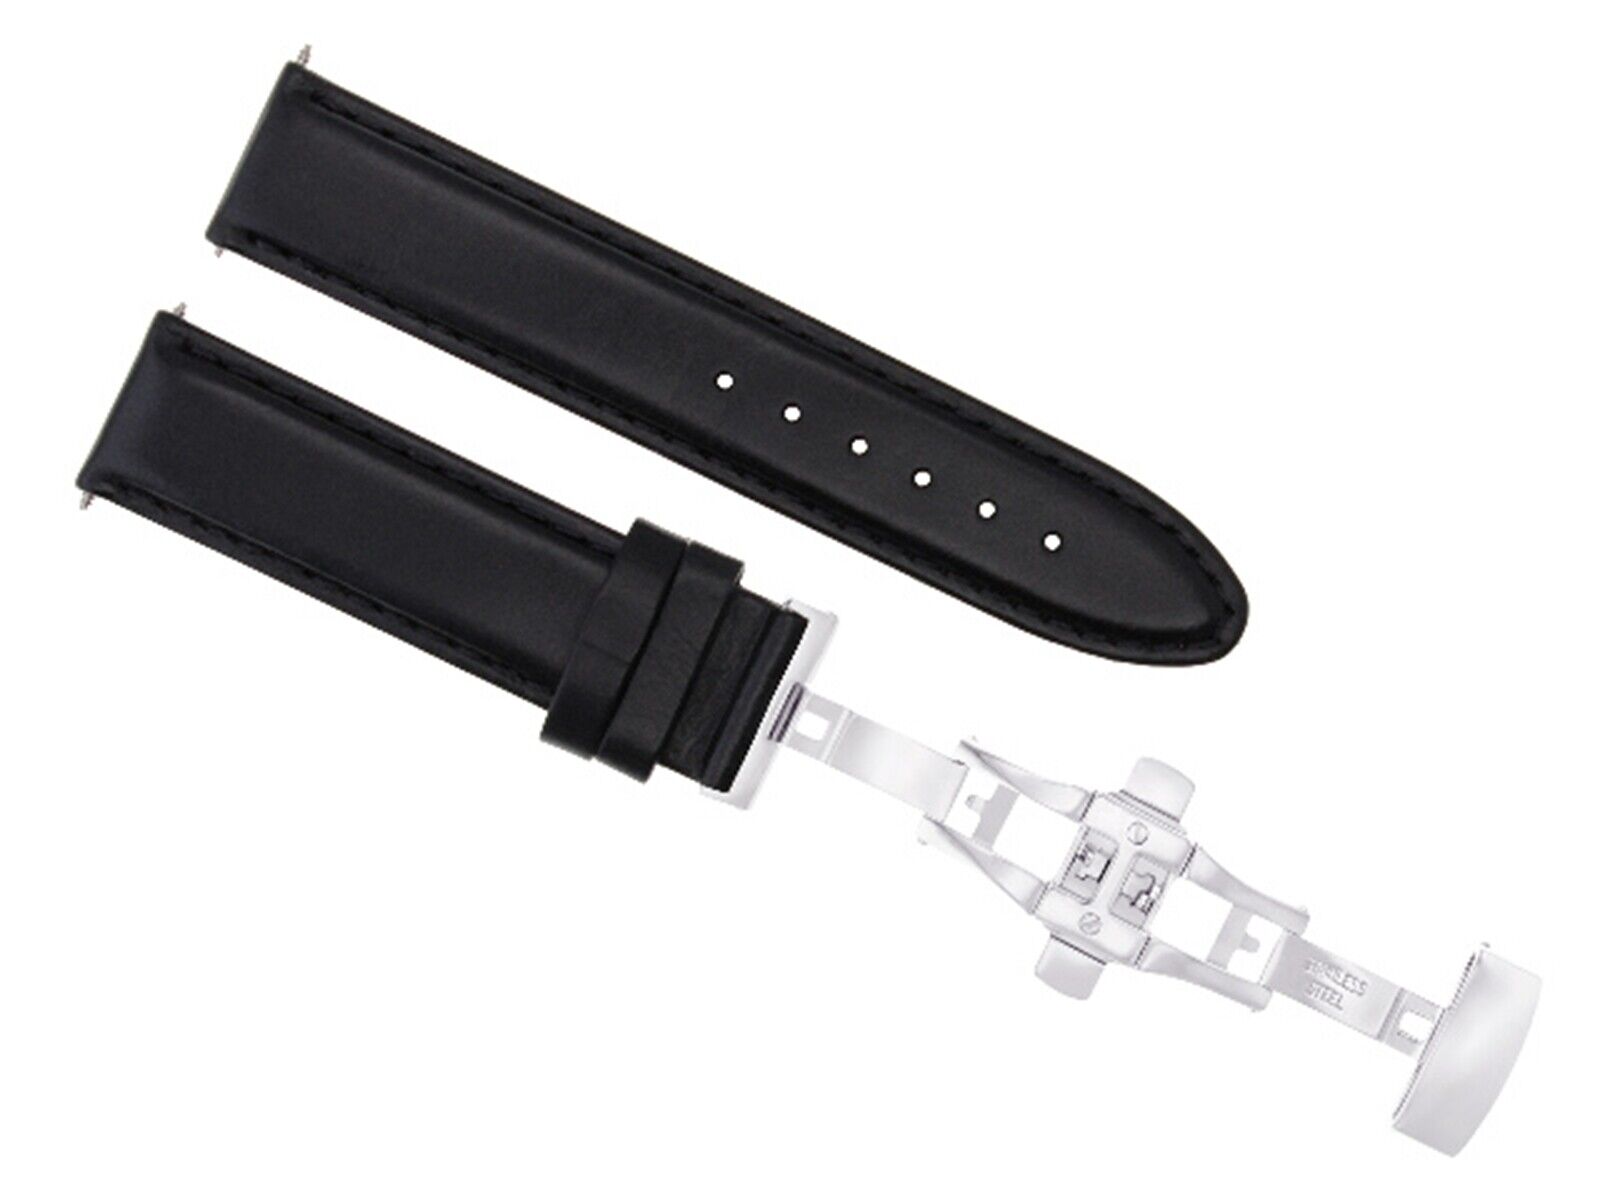 20MM SMOOTH LEATHER WATCH BAND STRAP DEPLOYMENT CLASP BUCKLE FOR IWC PILOT BLACK